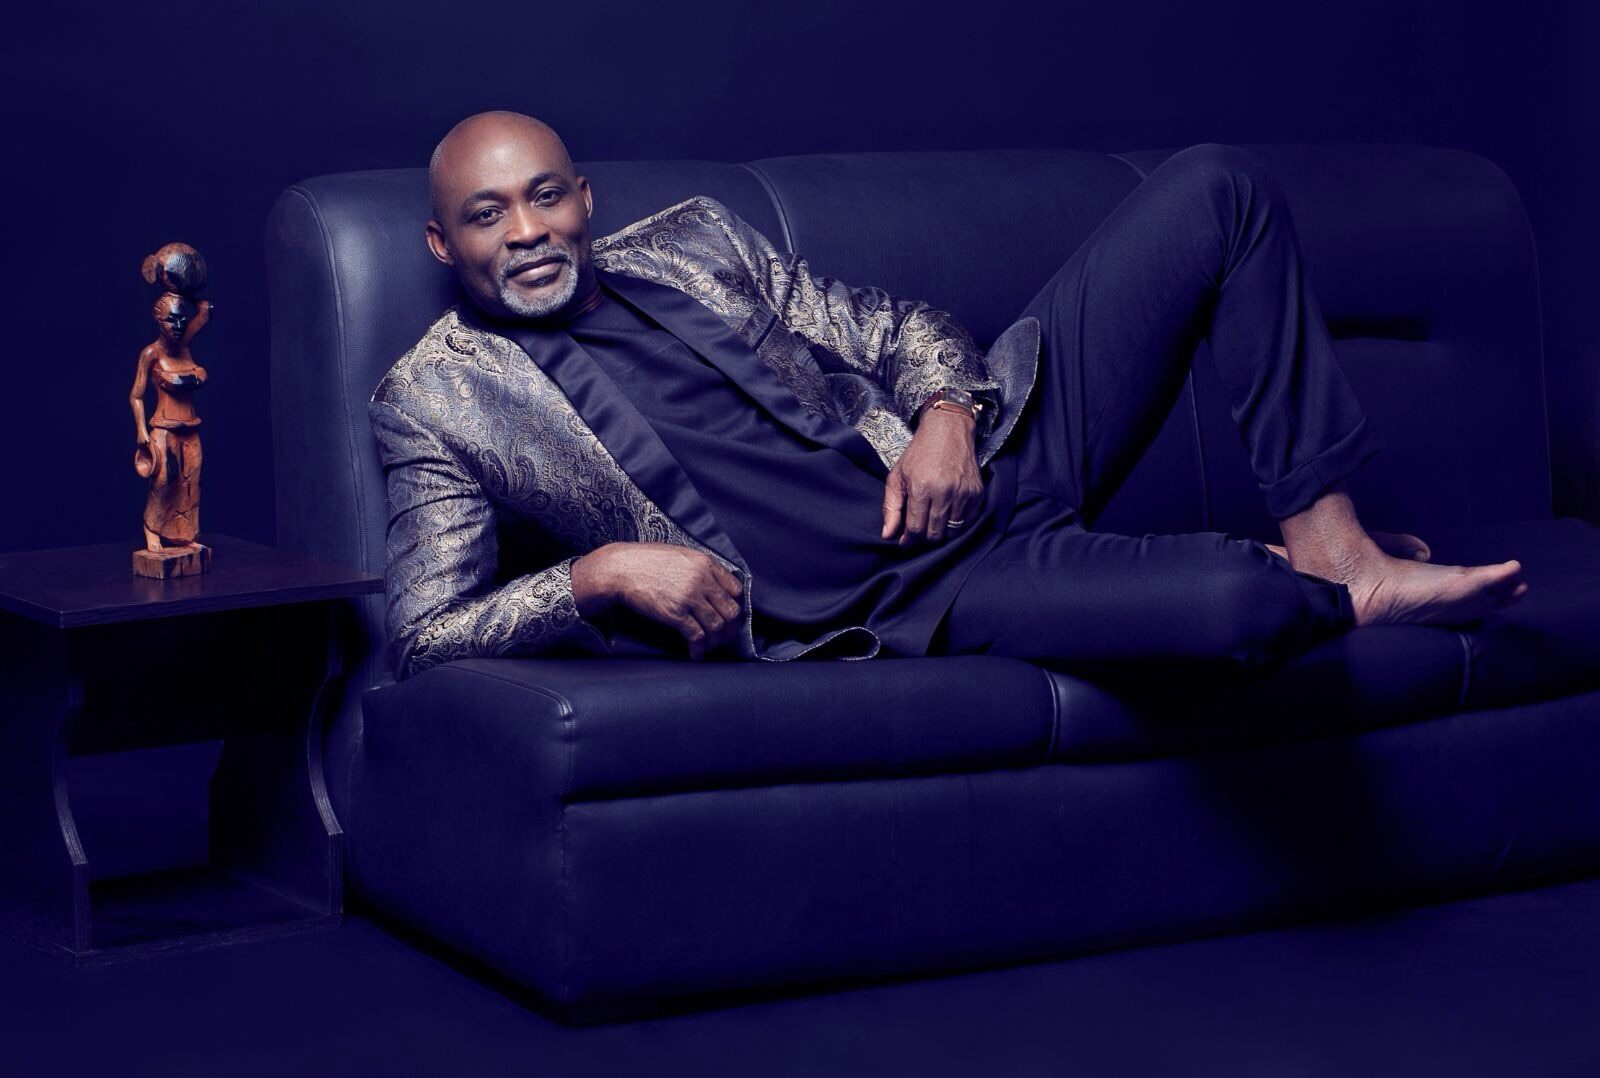 “A woman bought me bags of cement when I was building my first house” – Richard Mofe Damijo